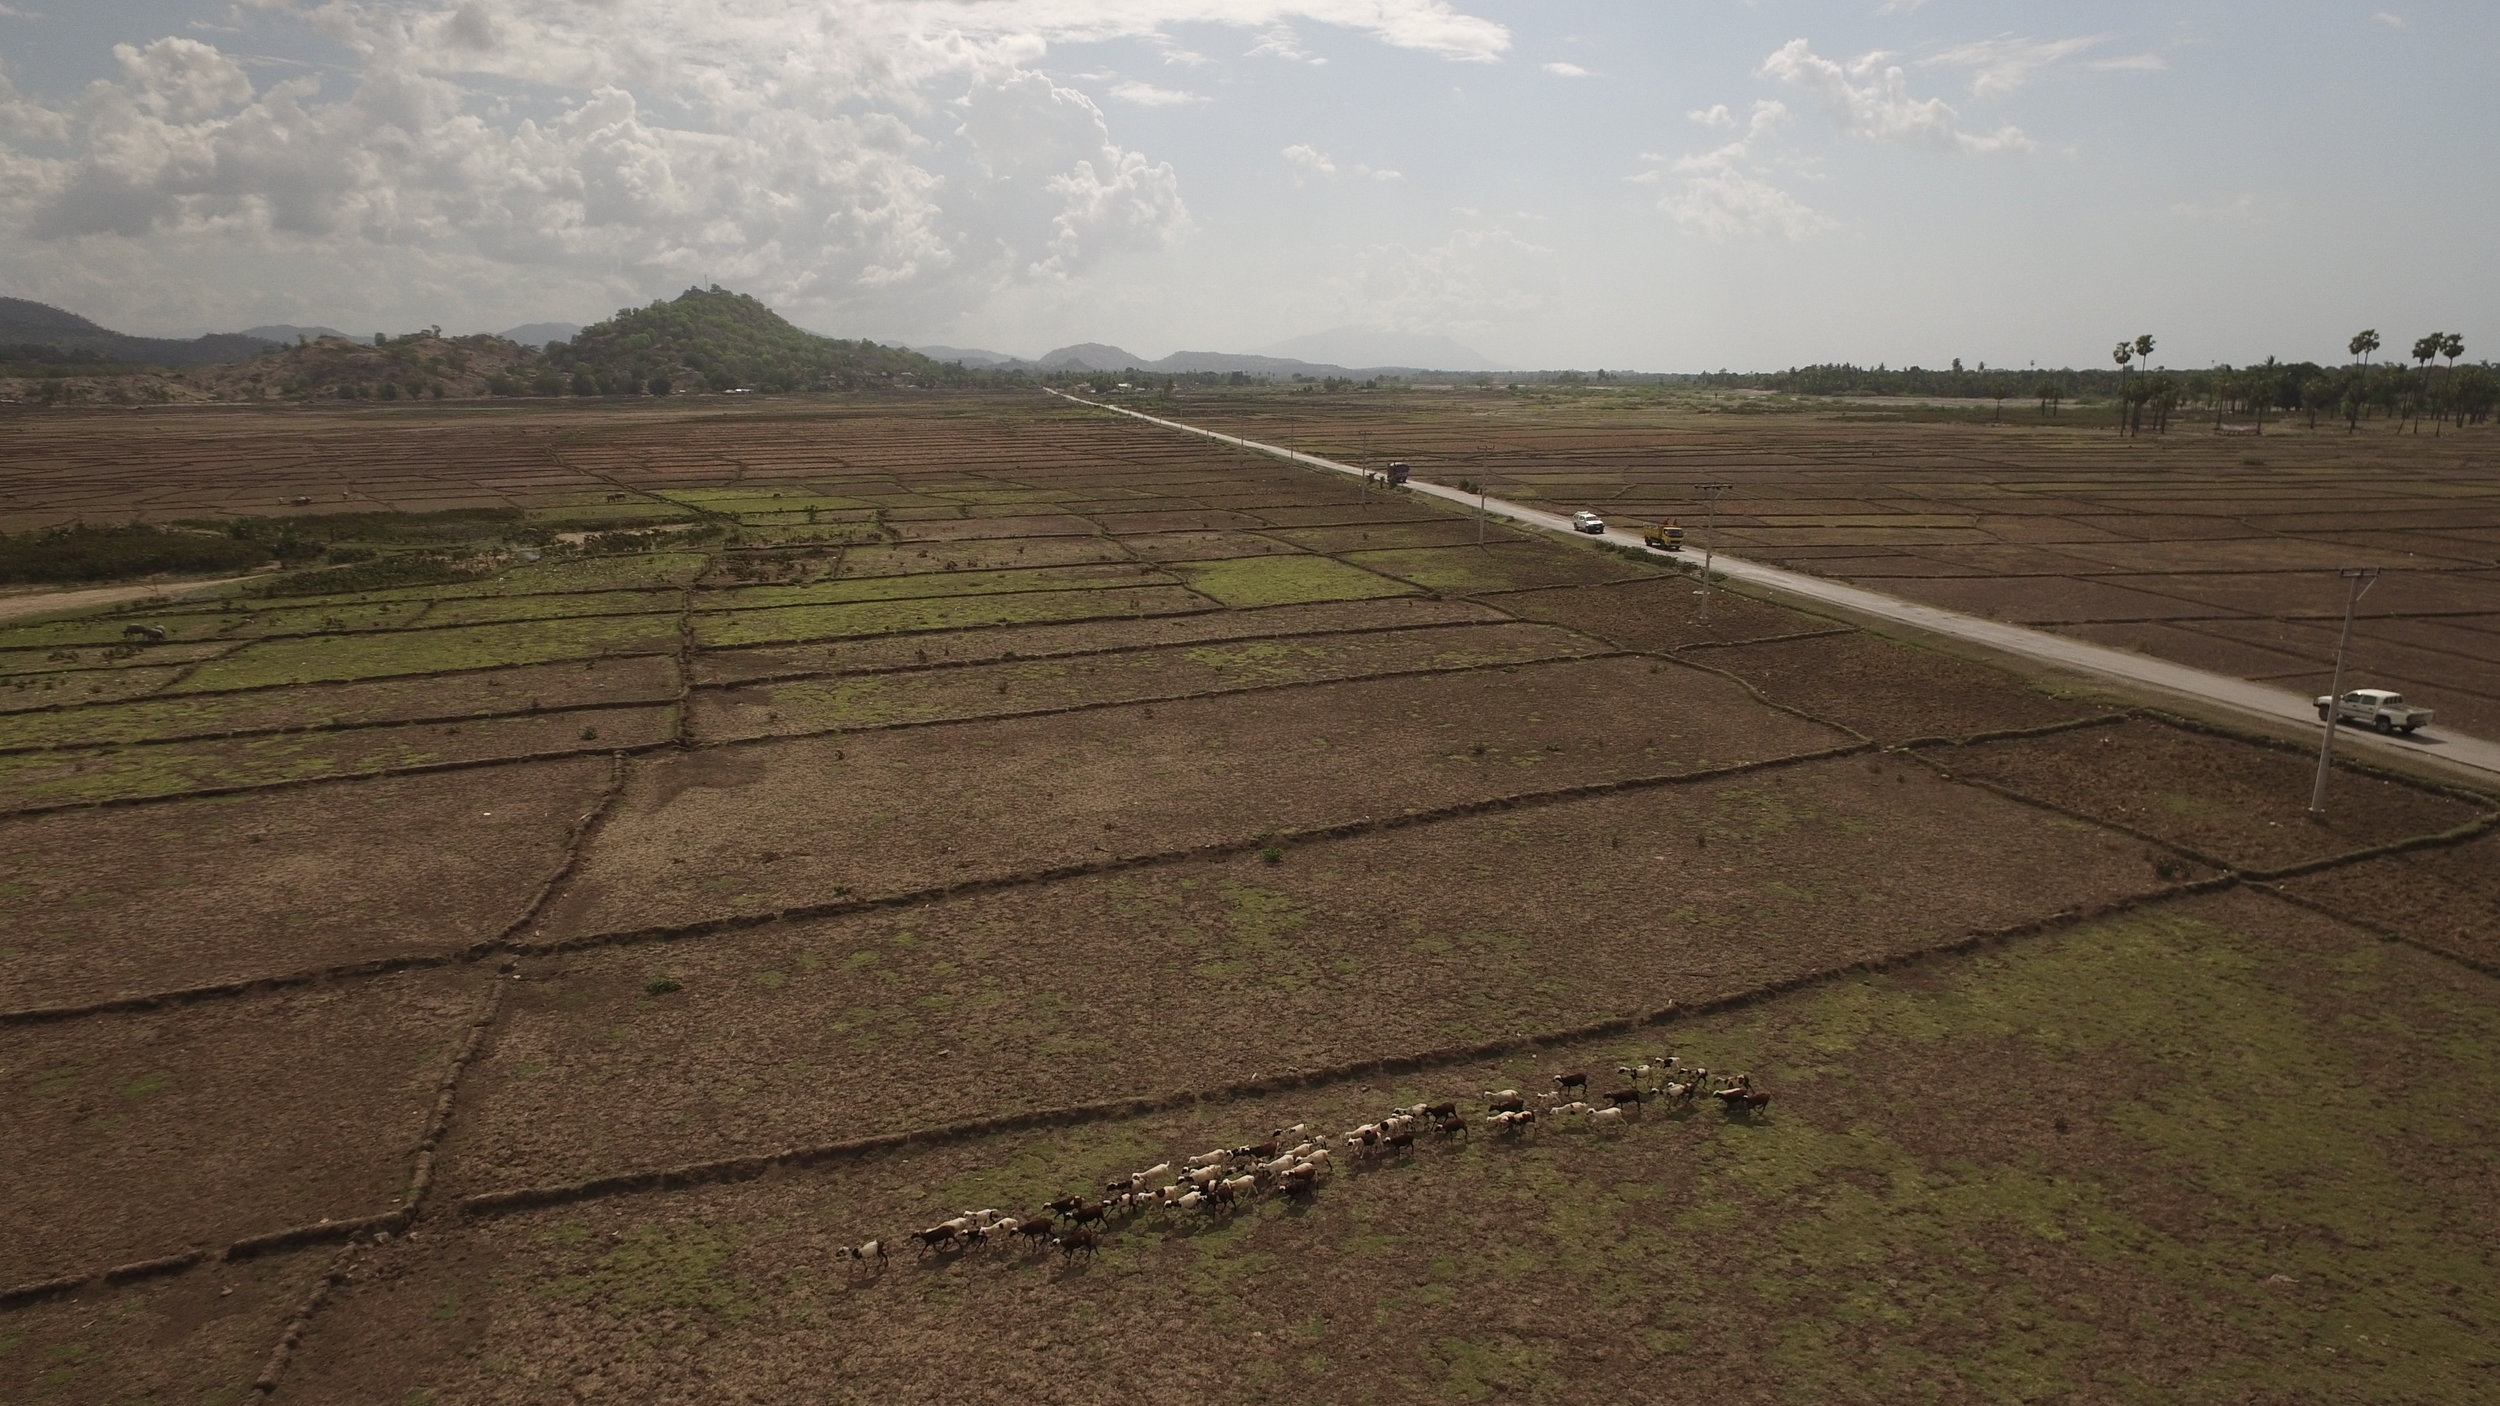 Drone footage from Timor-Leste farmlands by Ben Kreimer